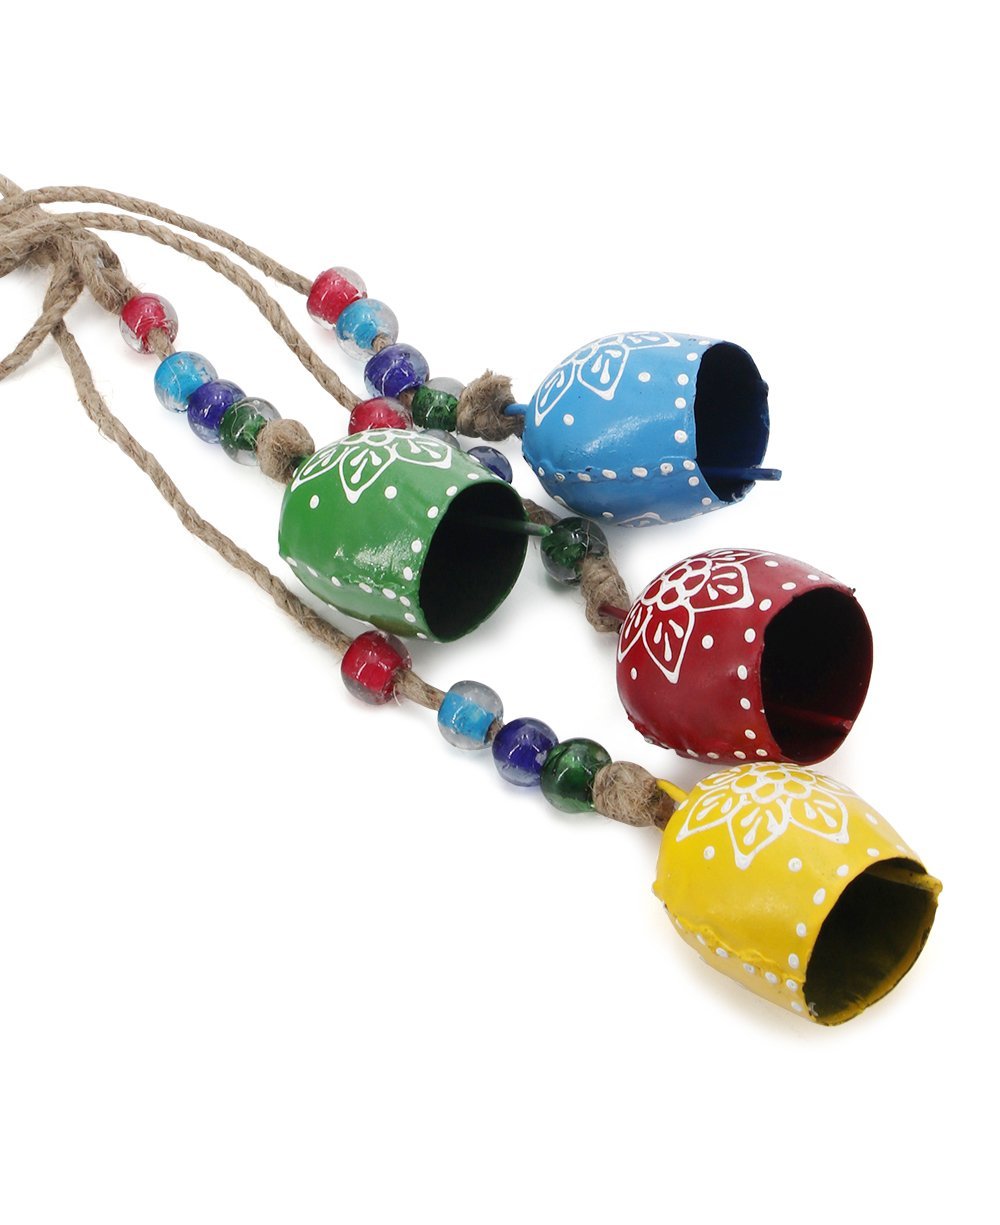 Fairtrade Cow Bells, String of 4 Bells - Wind Chimes